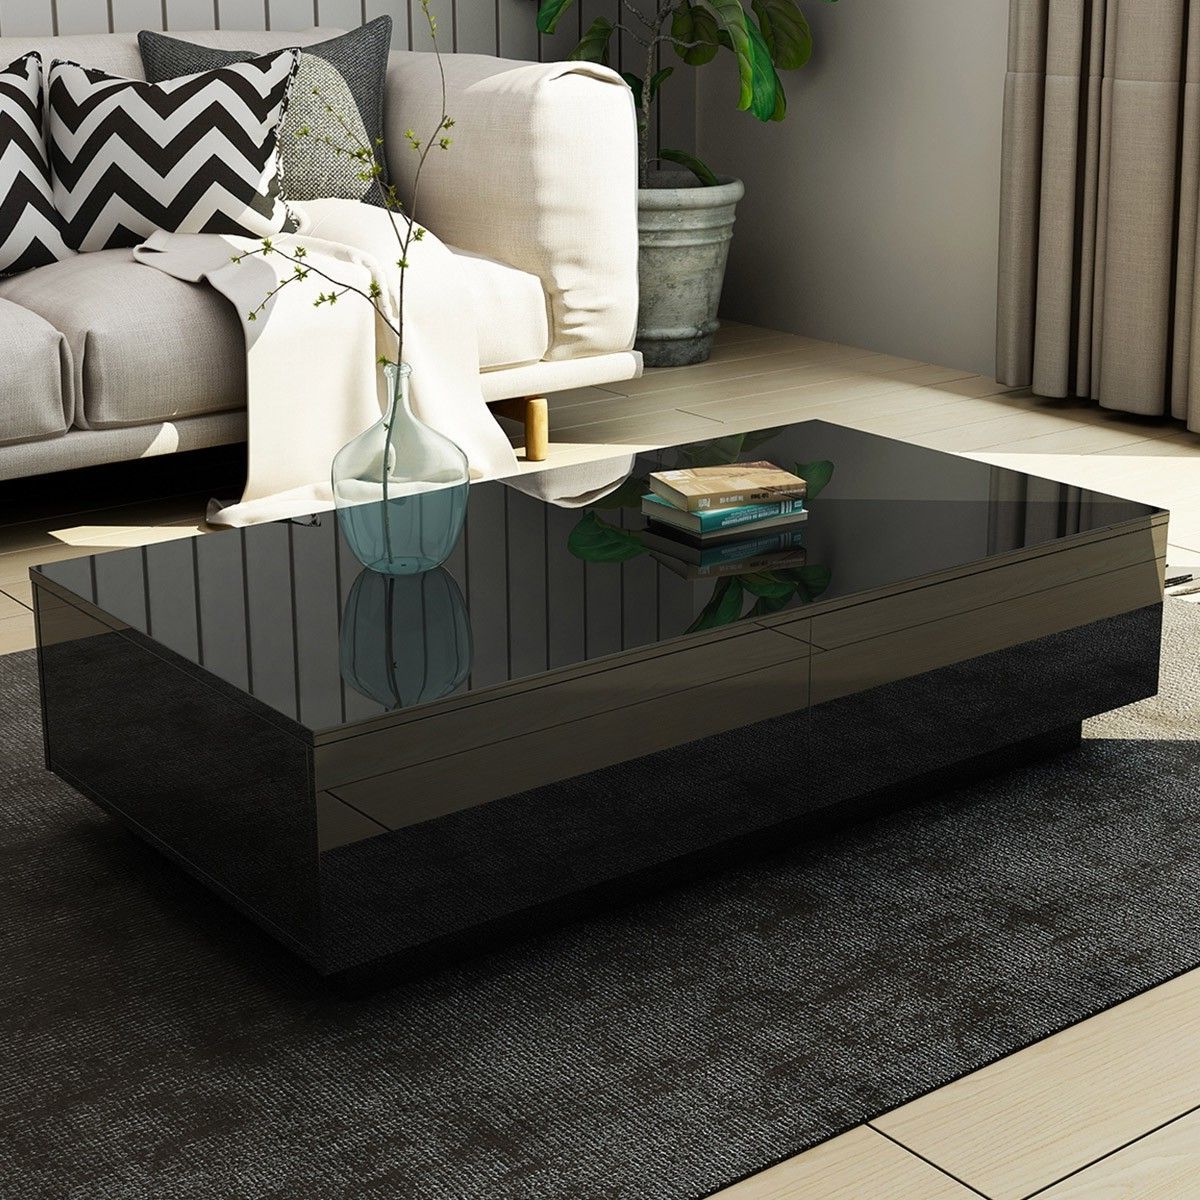 Black Coffee Tables Intended For Most Current New 4 Drawer Coffee Table Wood Living Room Furniture High Gloss Black (View 9 of 10)